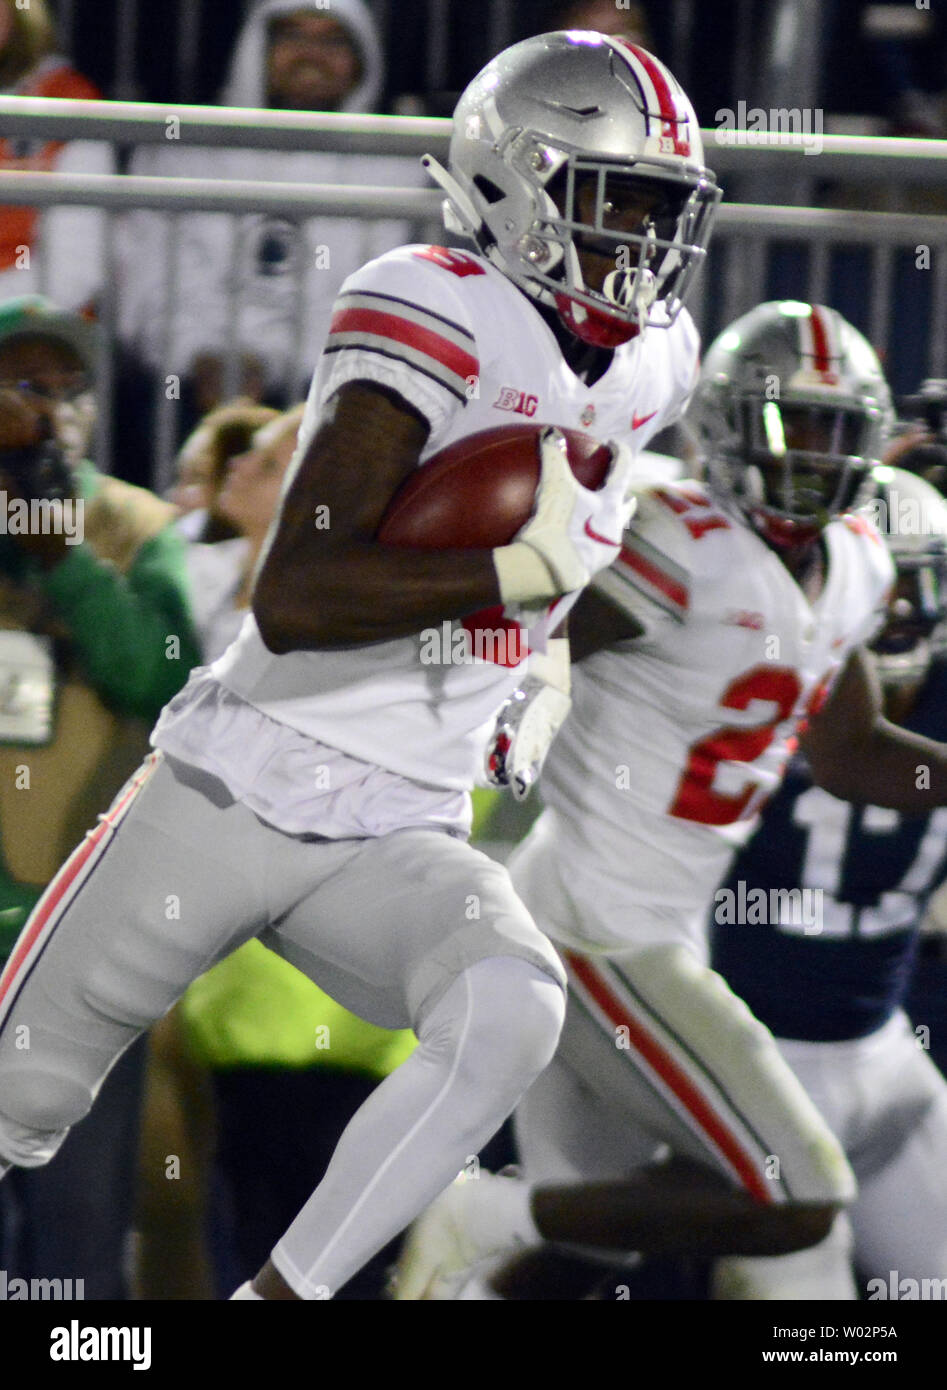 Ohio State Buckeyes wide receiver Binjimen Victor (9) catches the pass from Ohio State Buckeyes quarterback Dwayne Haskins for a touchdown in the fourth quarter of the 27-26 Buckeyes victory against the Penn State Nittany Lions at Beaver Stadium in State College , Pennsylvania on September 29, 2018. Photo by Archie Carpenter/UPI Stock Photo